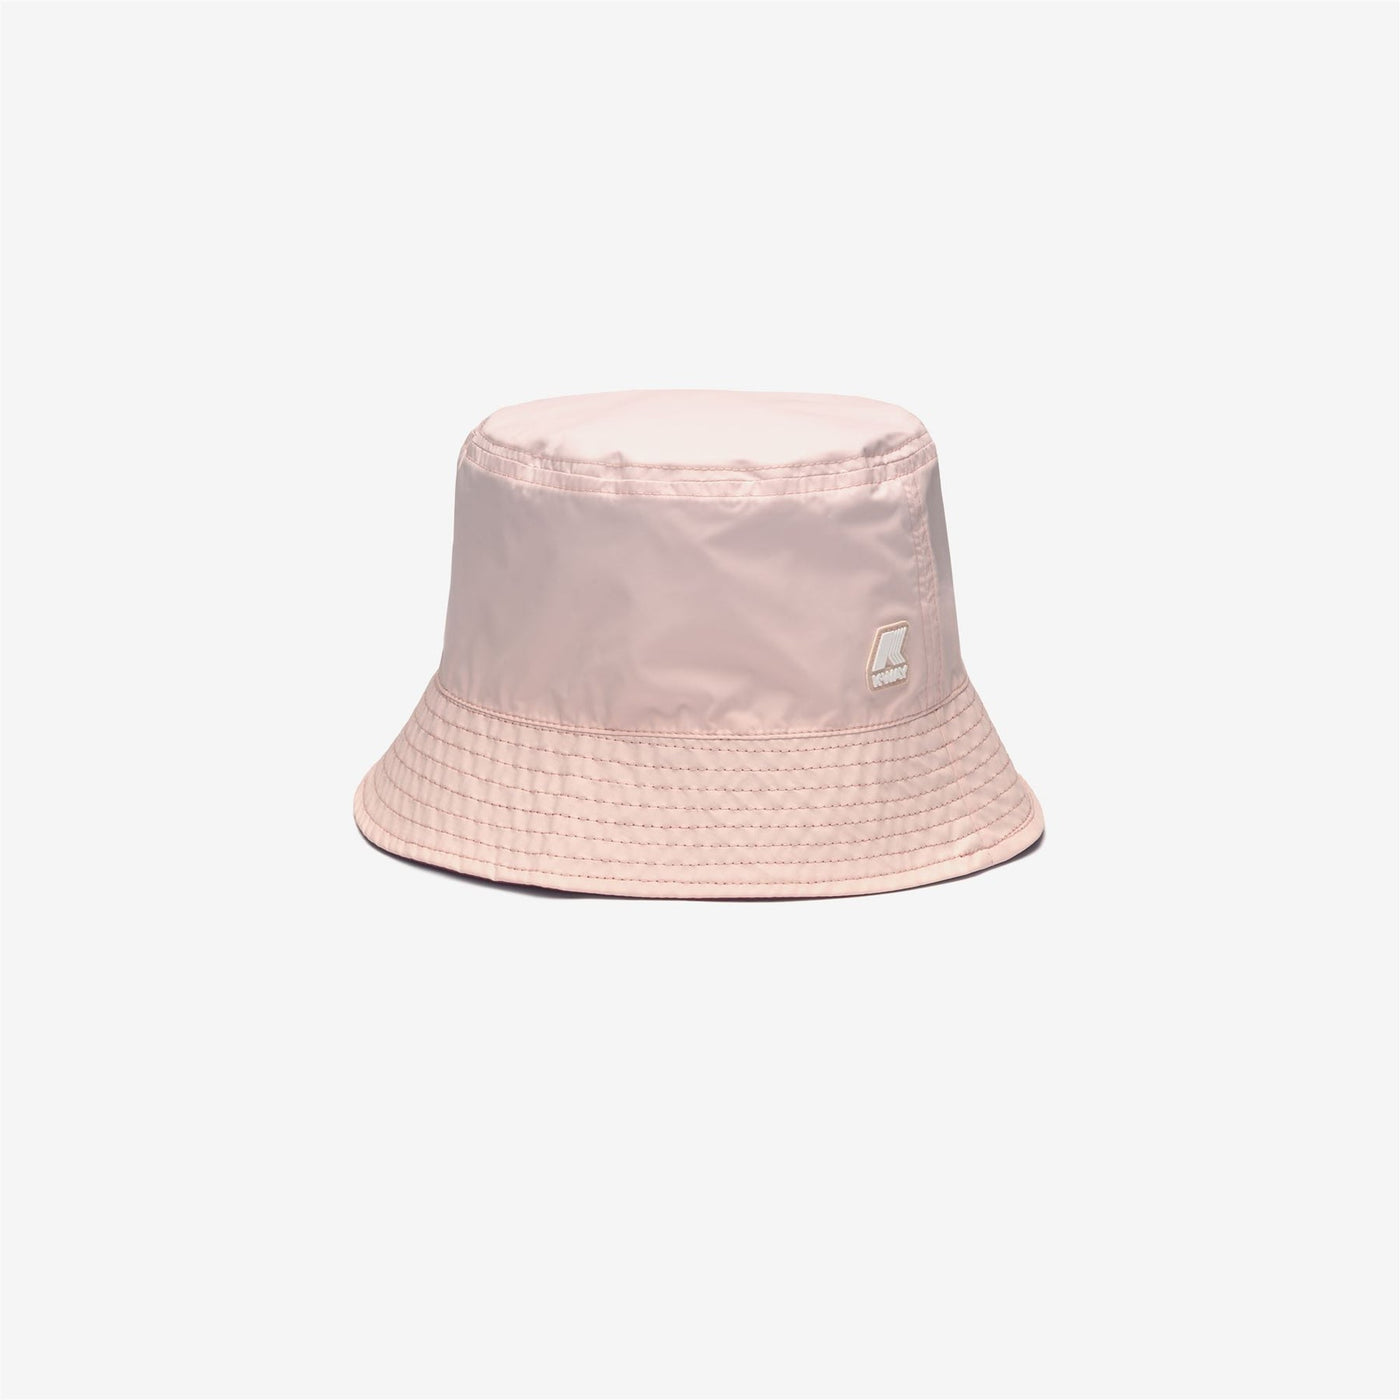 PASCALLE PLUS DOUBLE - HEADWEAR - UNISEX - PINK RED